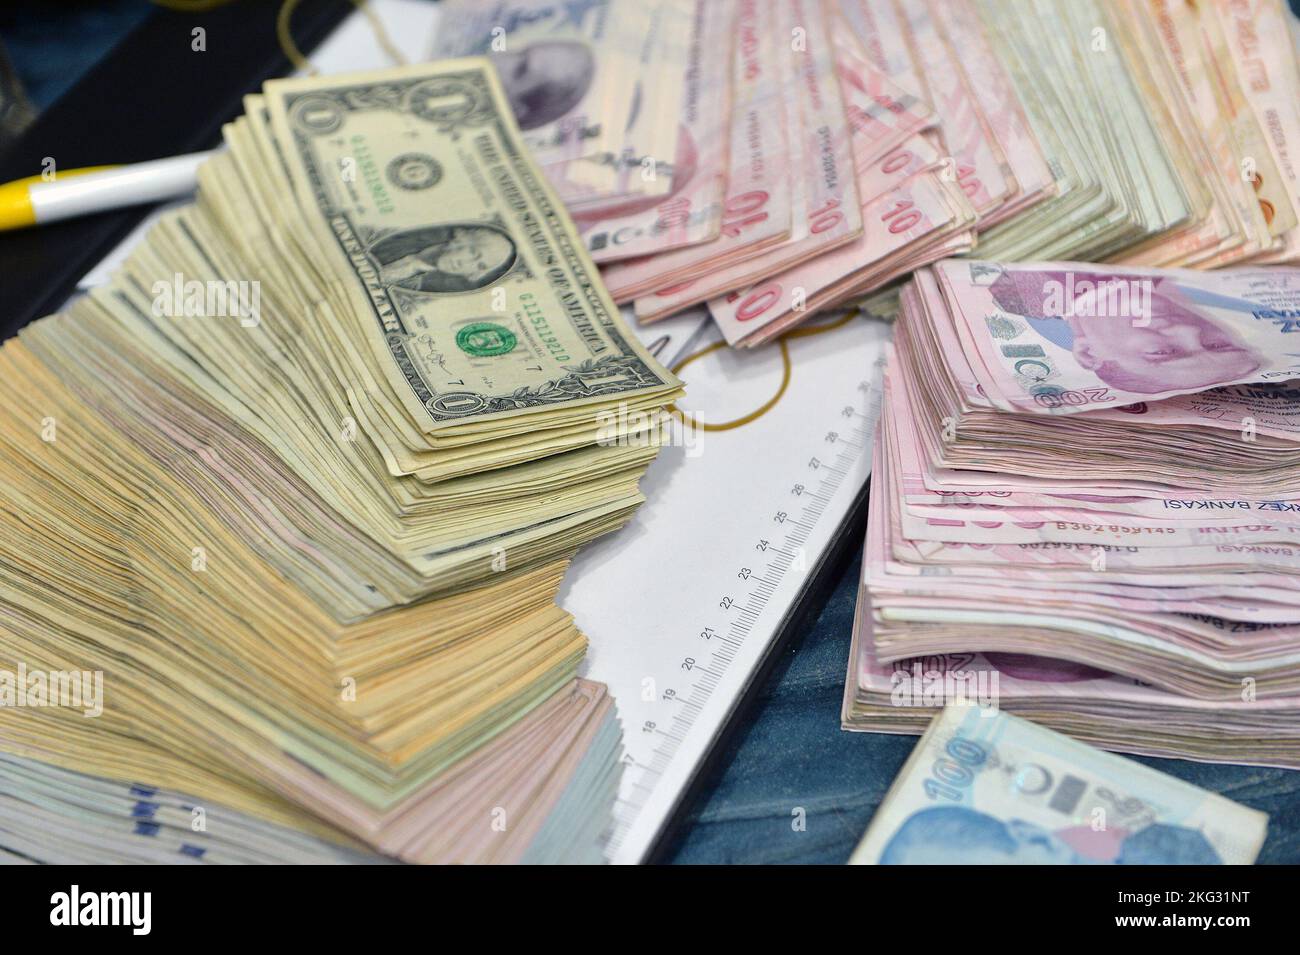 Turkish Lira and American Dollars. Financial crisis, devaluation and exchange rates themed banknotes close-up Stock Photo